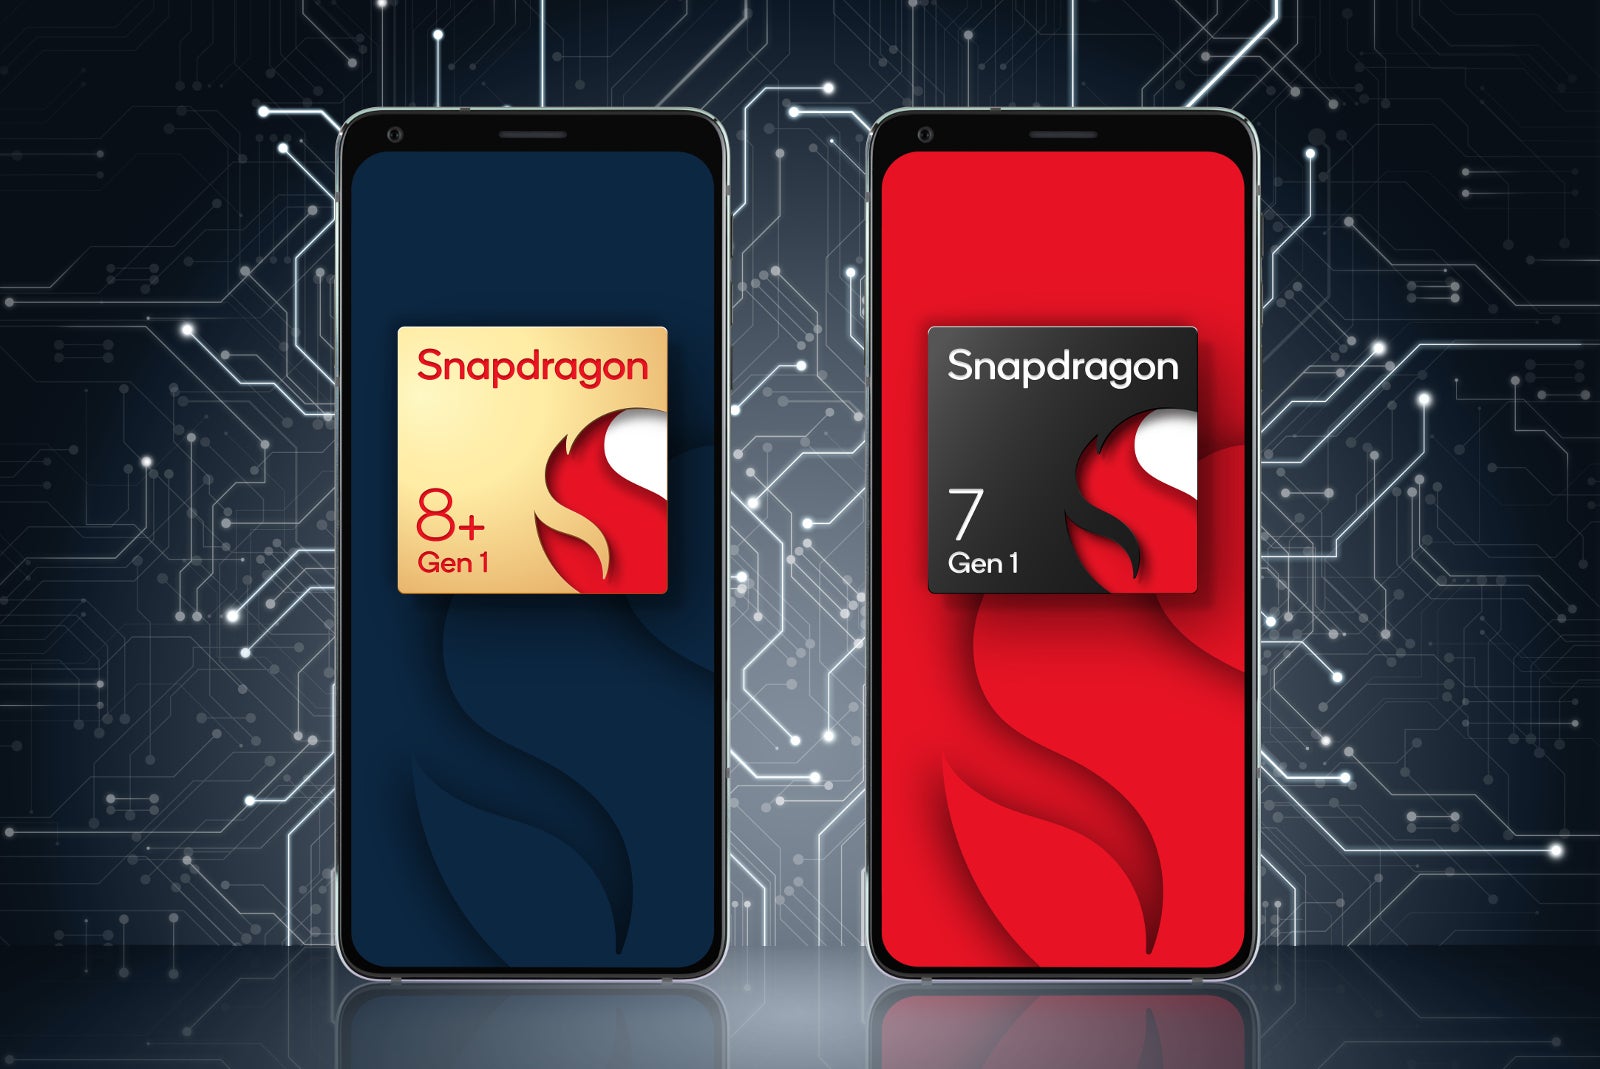 Snapdragon 8+ Gen 1 pushes the limits, Snapdragon 7 Gen 1 brings value to gamers